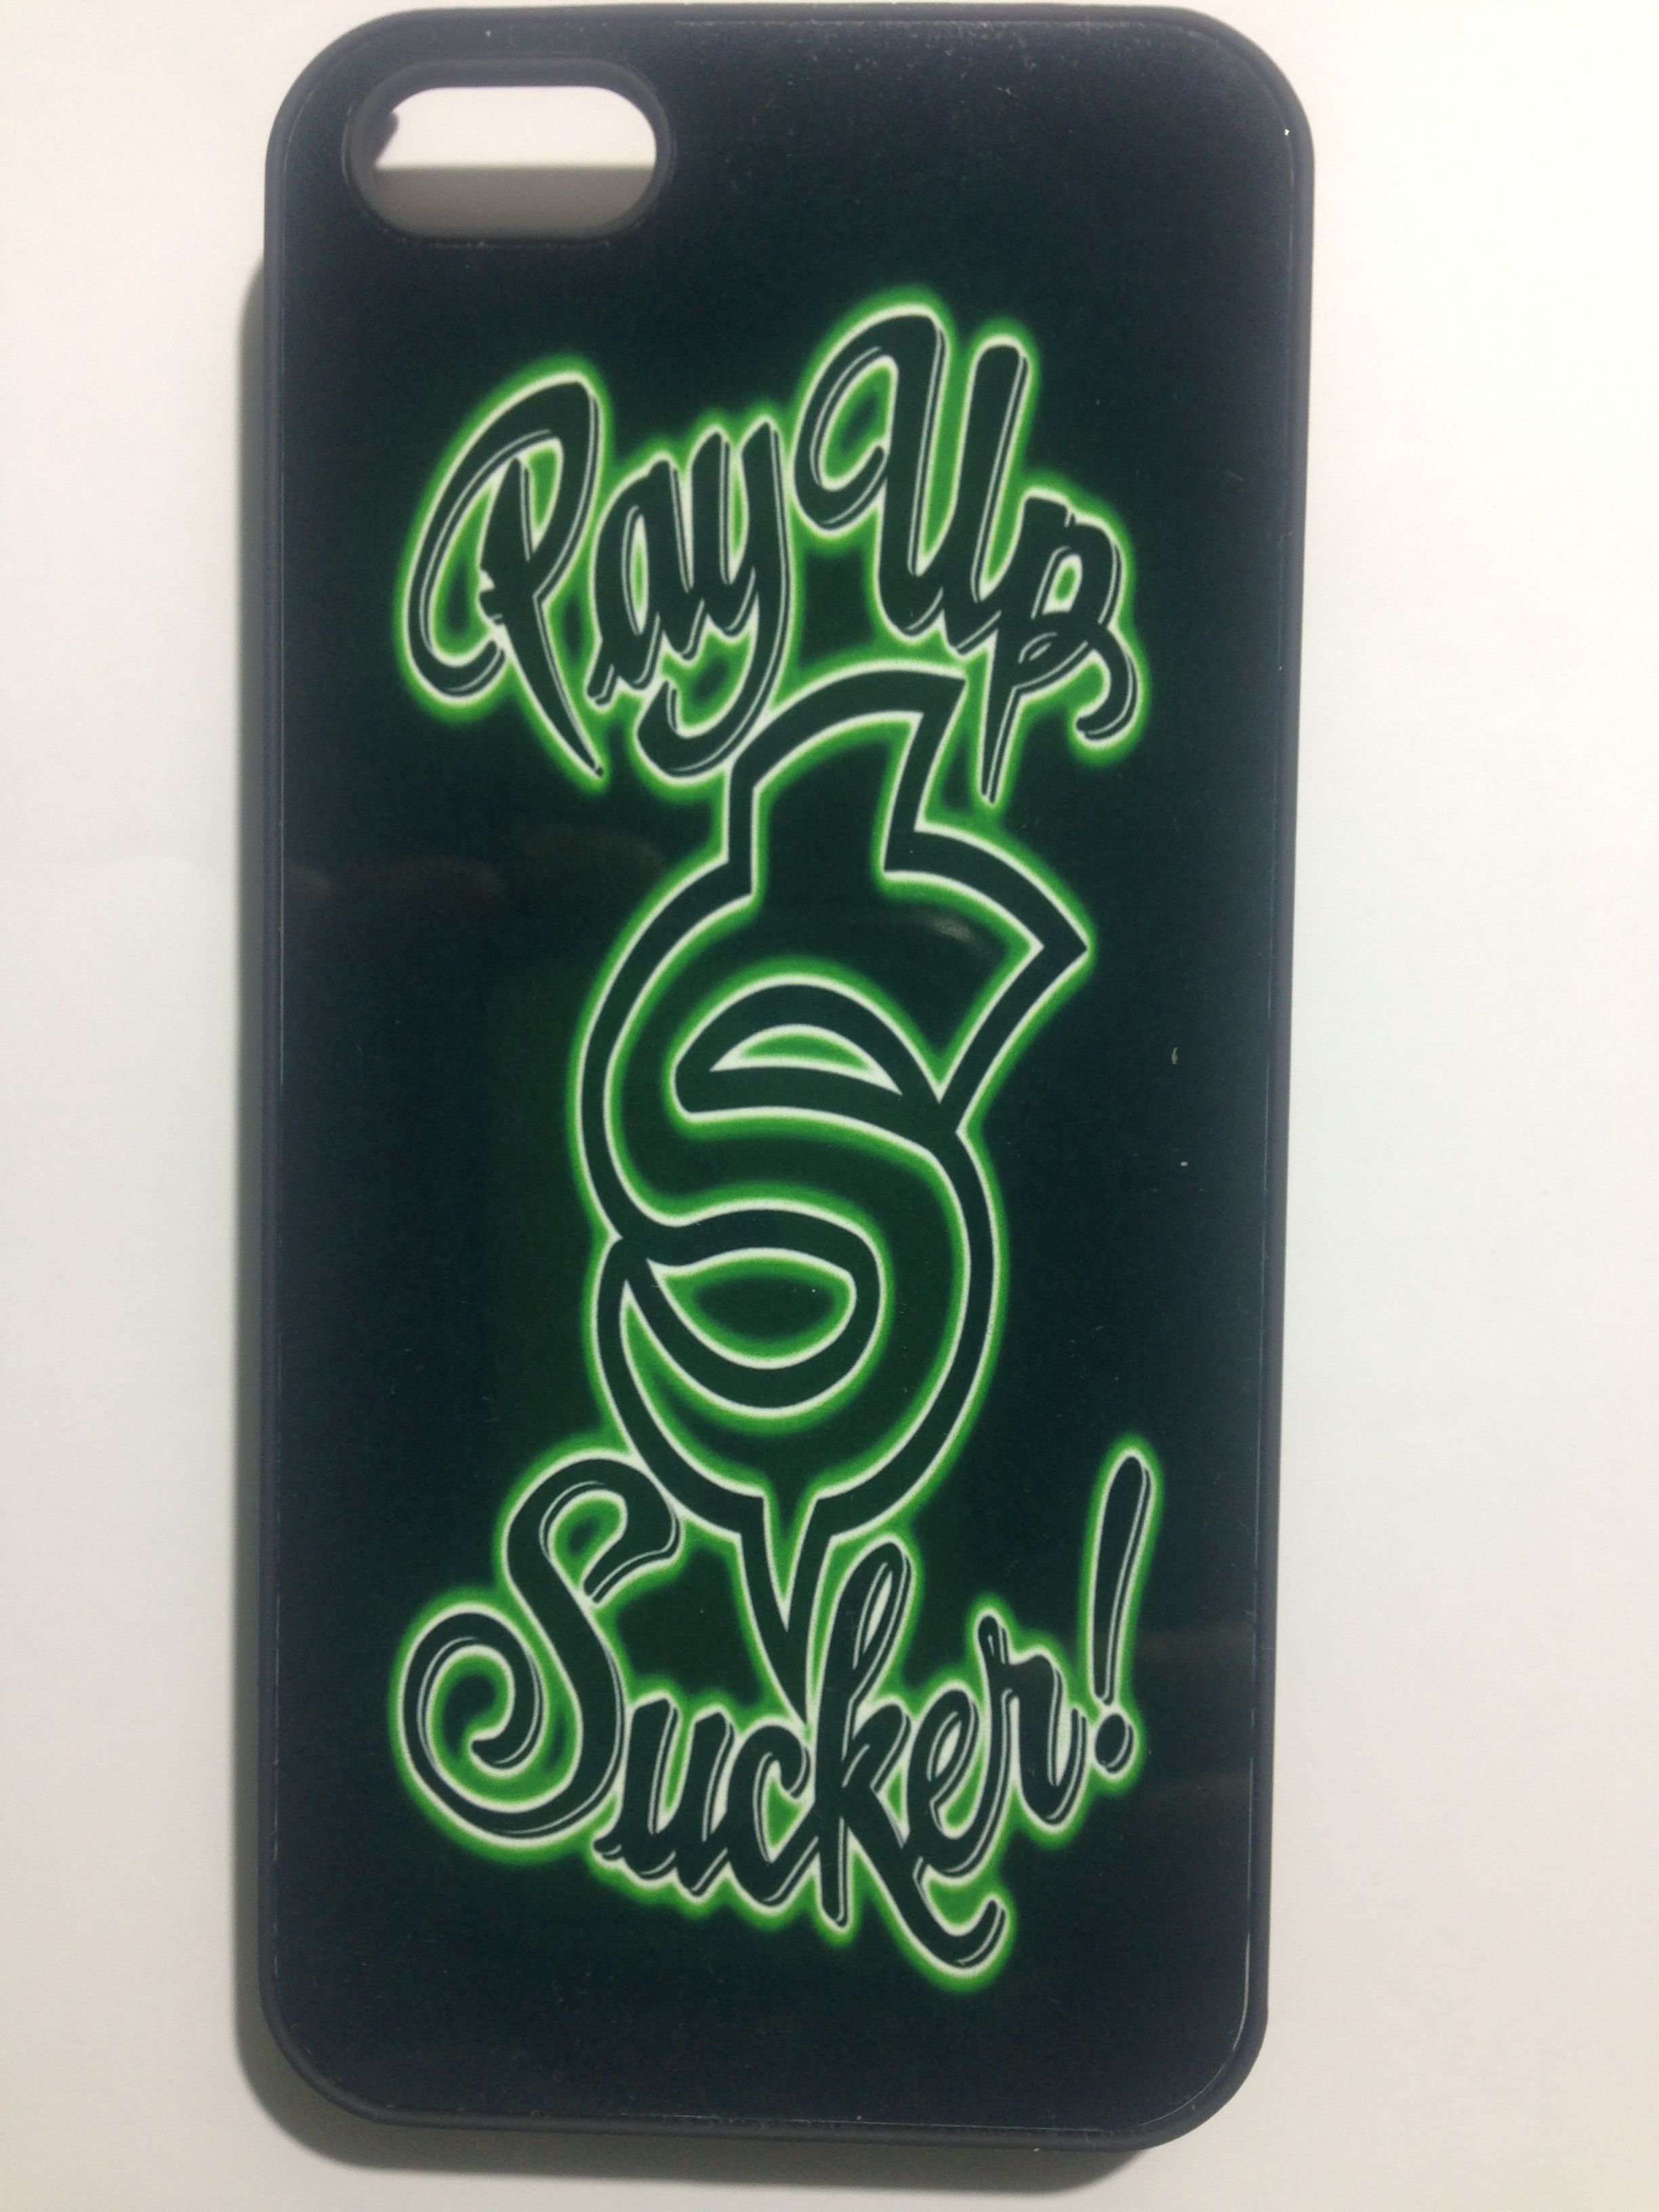 Iphone 5s made with sublimation printing